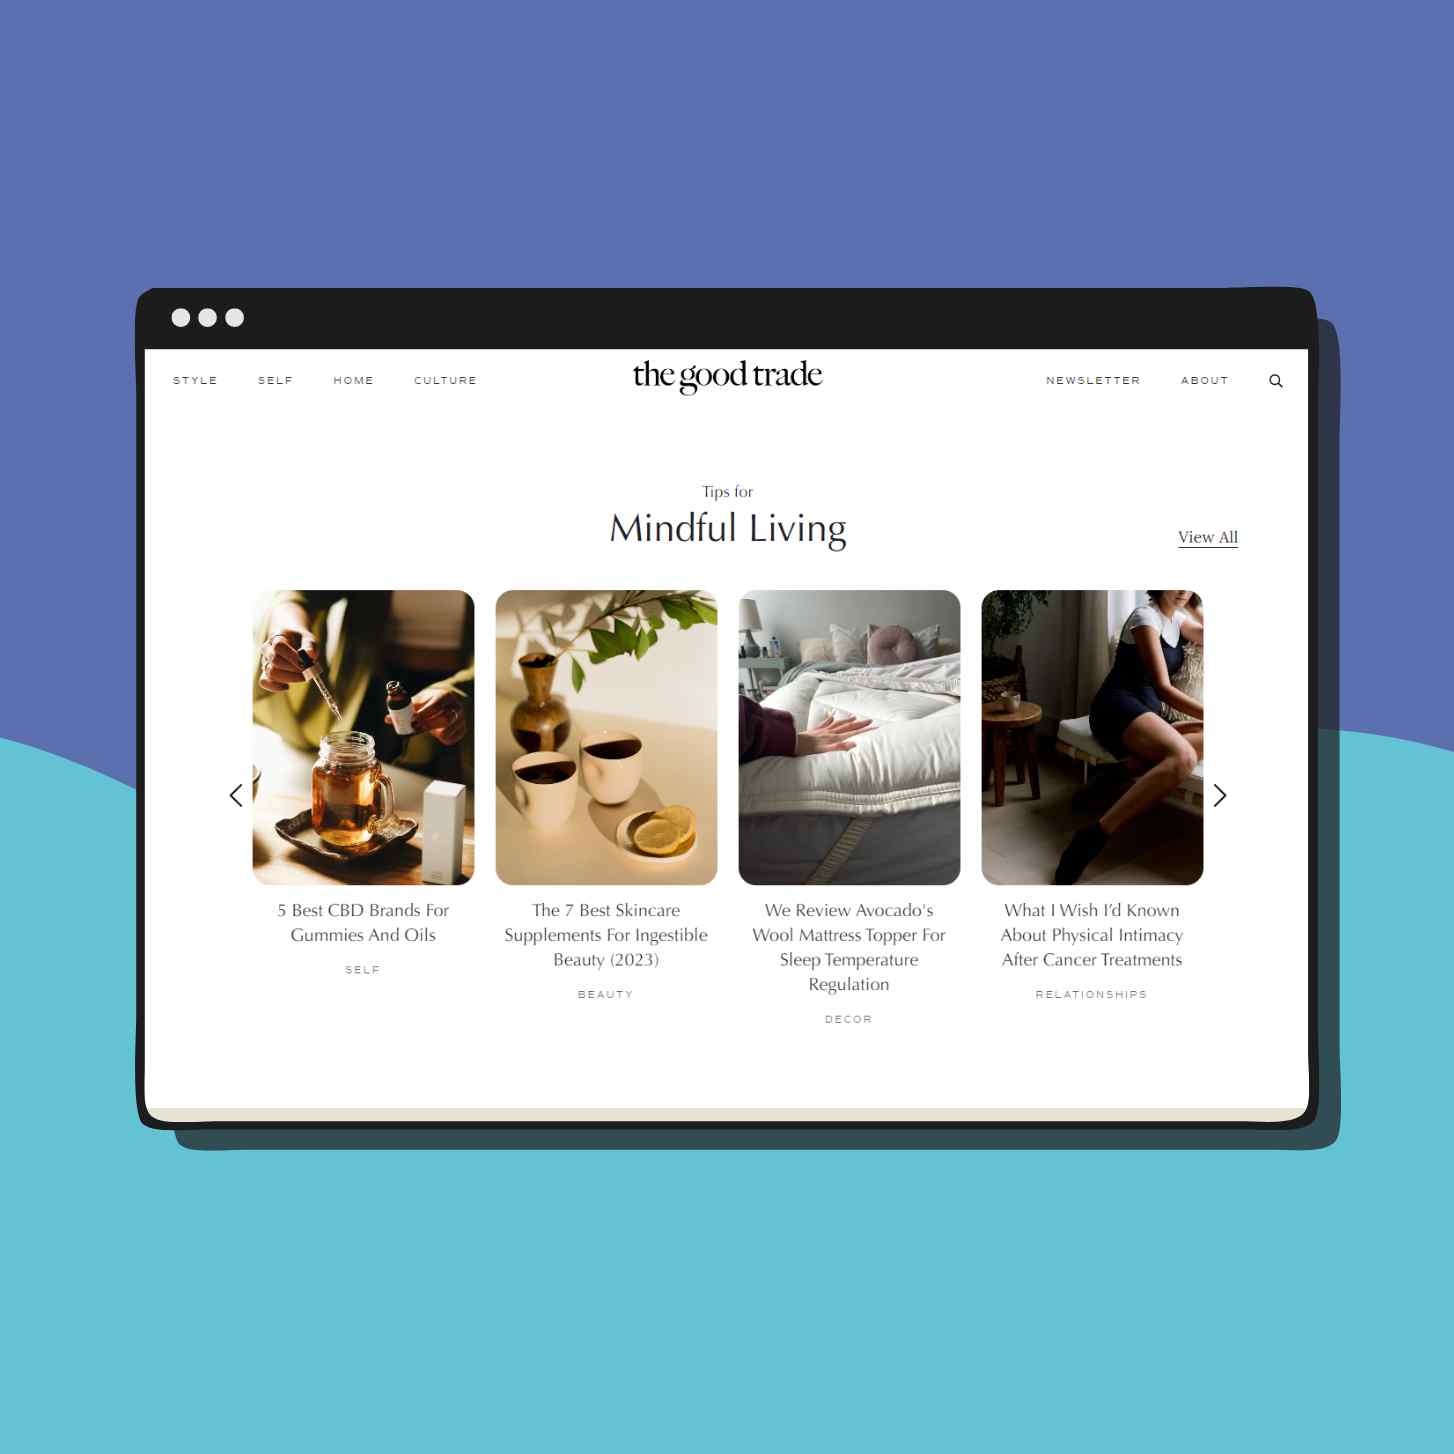 Homepage of The Good Trade Showcasing their Mindful Living Articles